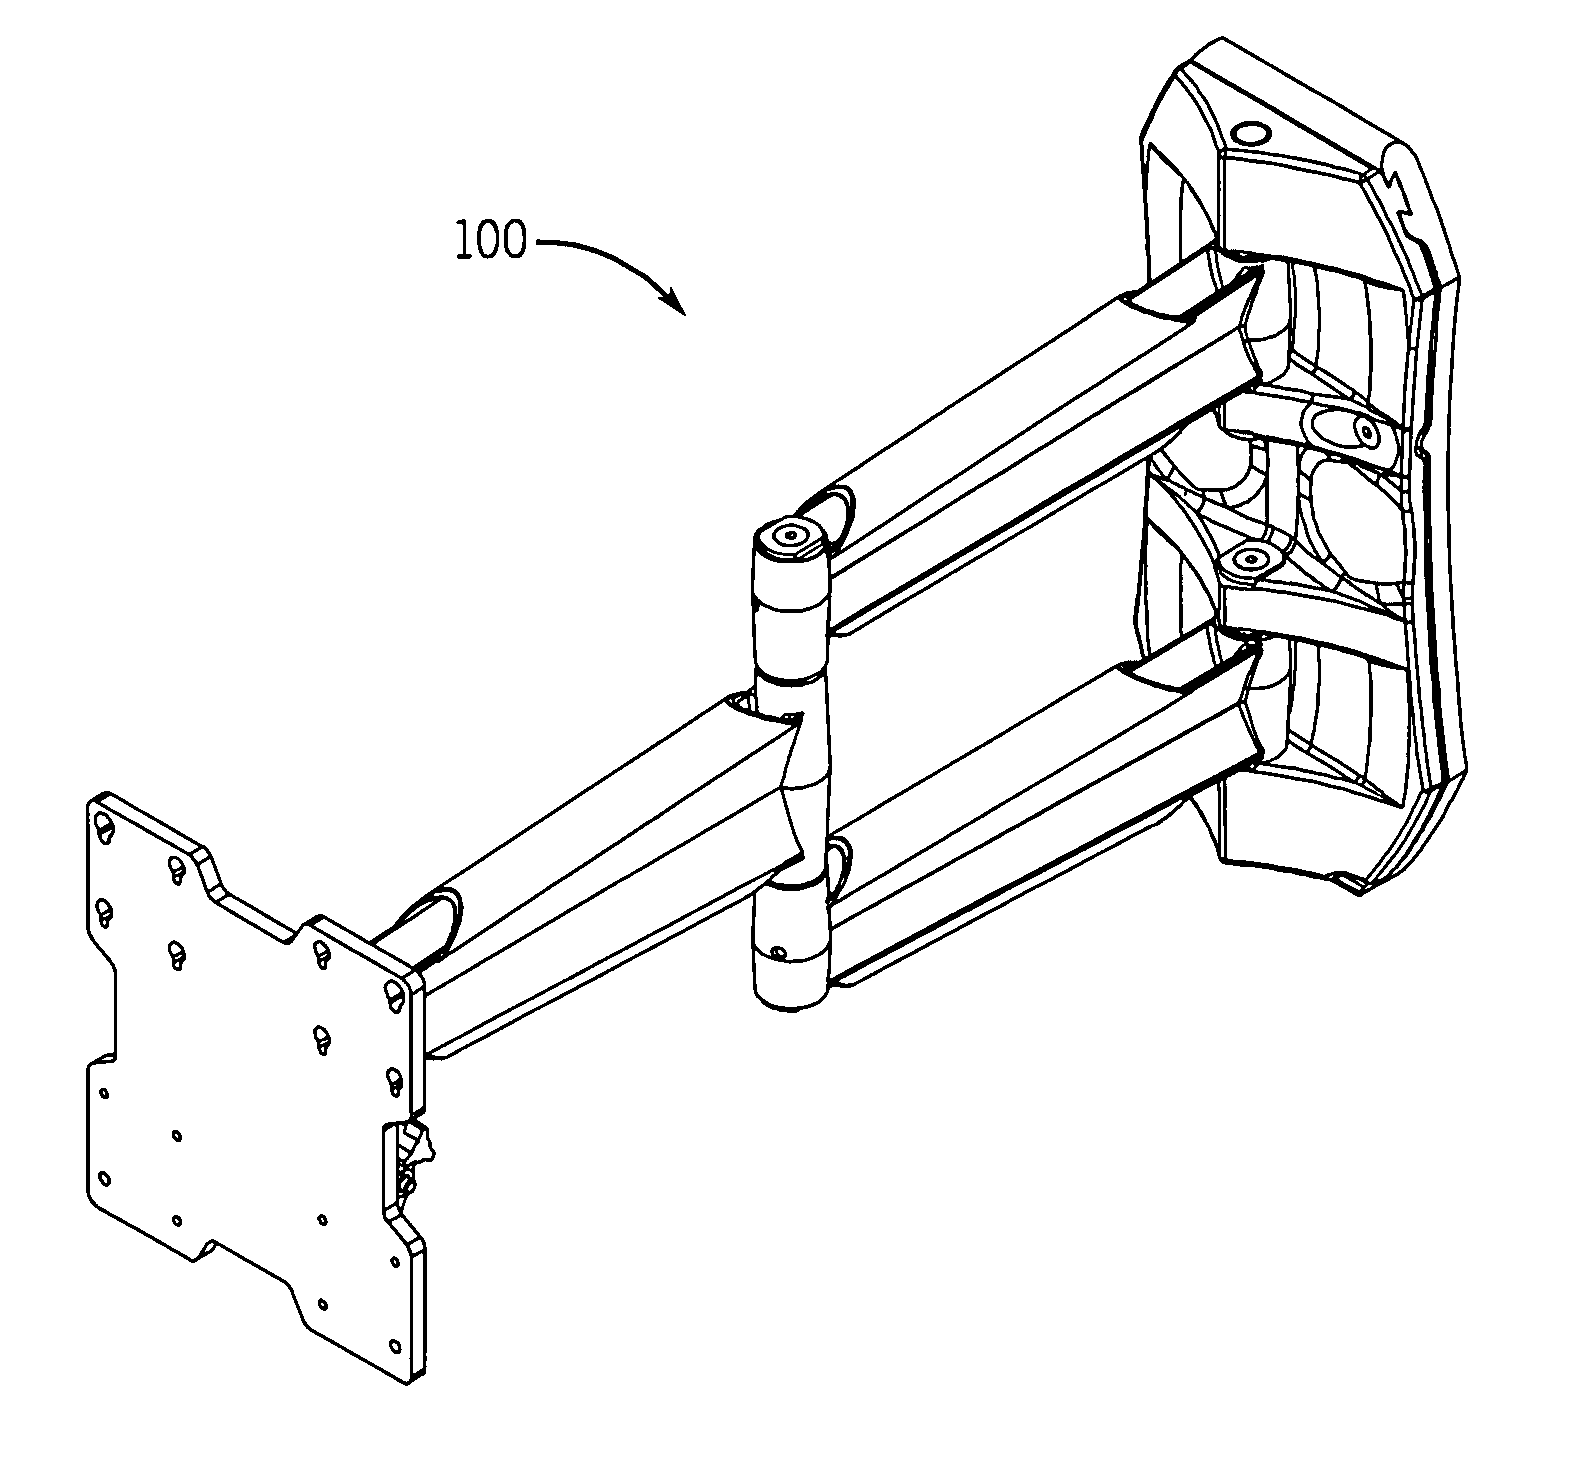 Mounting system with adjustable moving capabilities